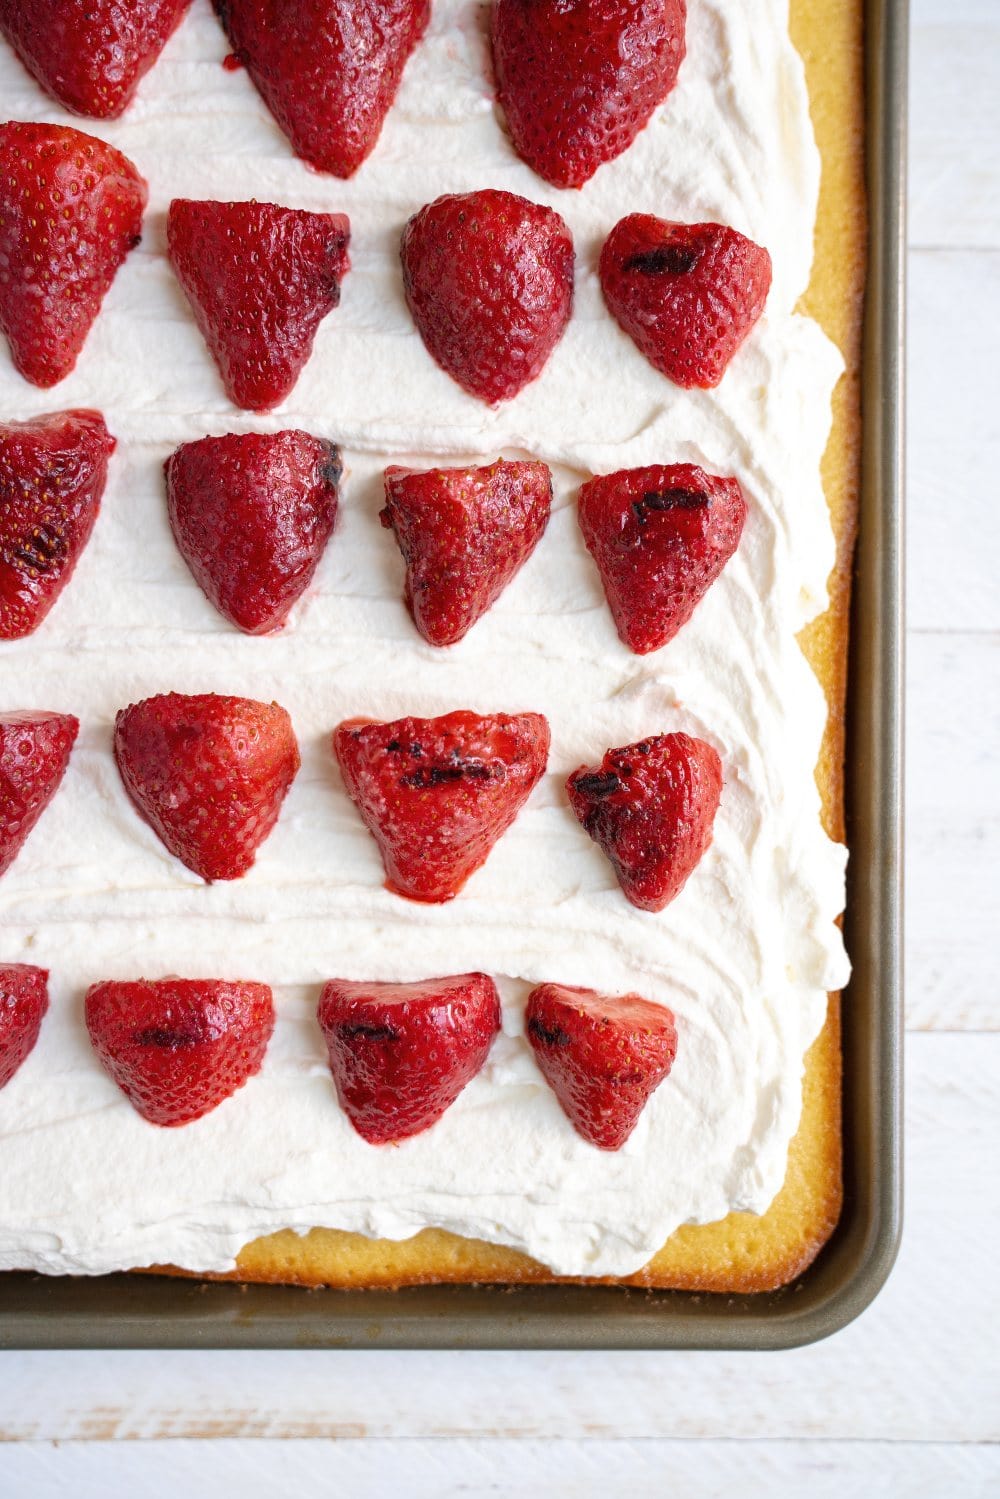 Vanilla Sheet Cake with Grilled Strawberries features an ultra moist, tender, and slightly spongy vanilla cake with fresh whipped cream and slightly smoky grilled strawberries on top. Perfect summer dessert for a crowd!